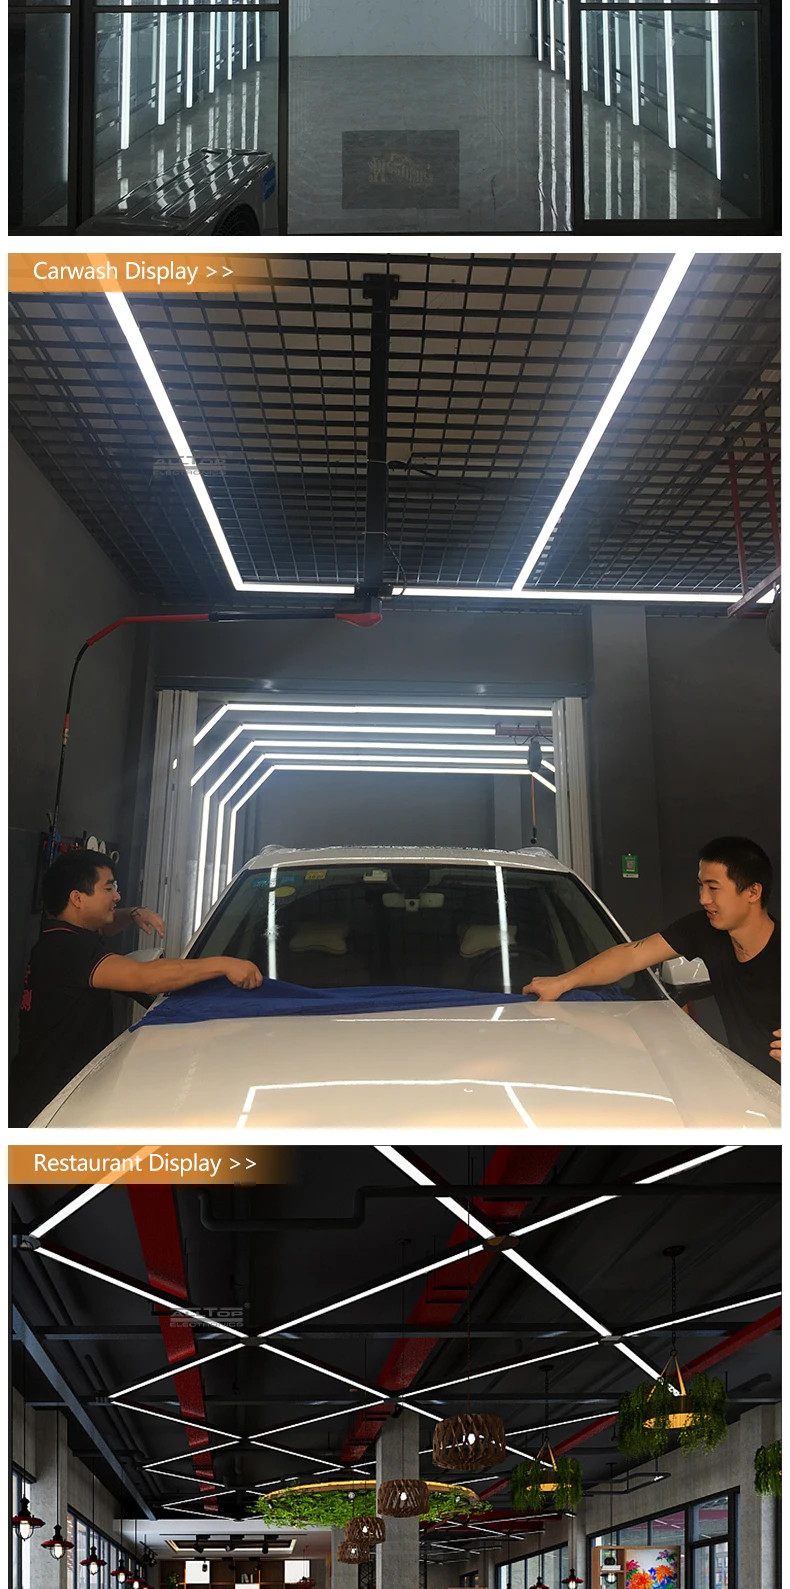 ALLTOP High quality CE RoHs certification indoor lighting 2835 chip 48w led pendant light